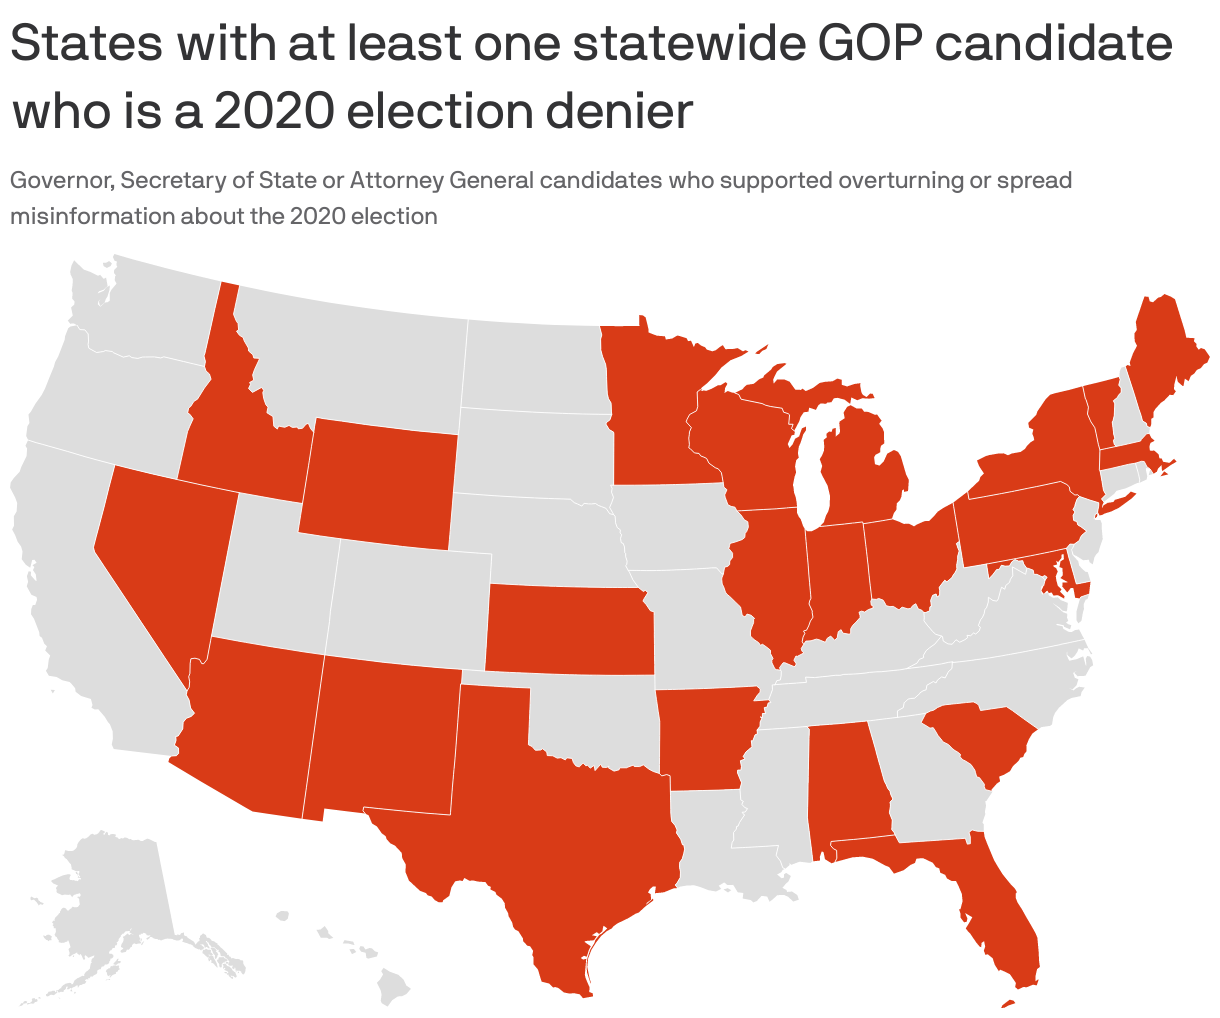 States with at least one statewide GOP candidate who is a 2020 election denier